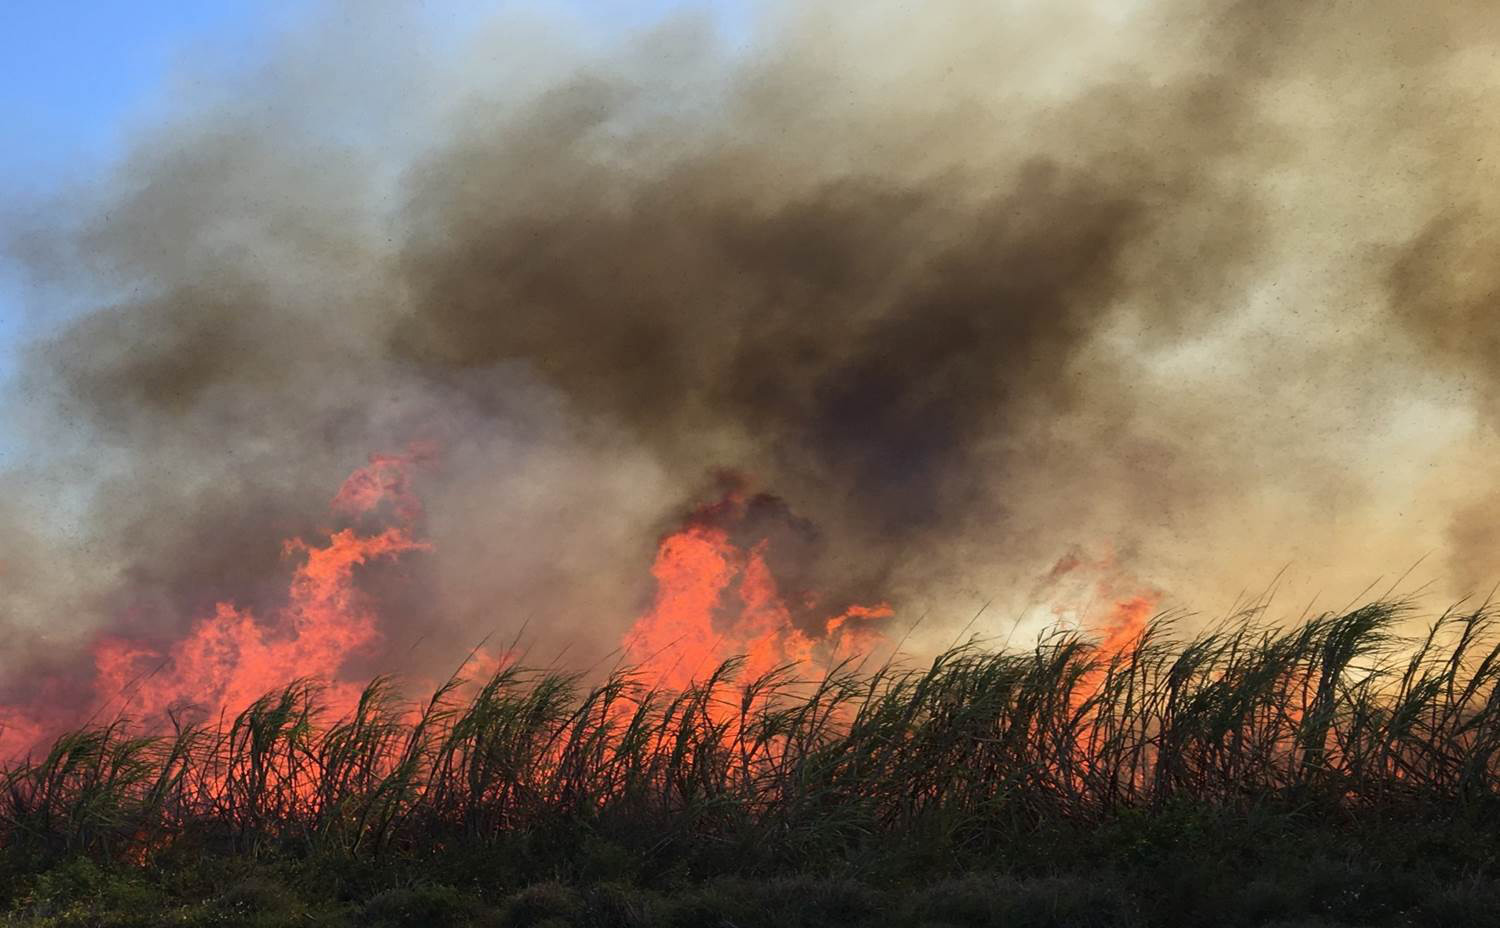 Flames envelope sugarcane stalks in a field near Clewiston.